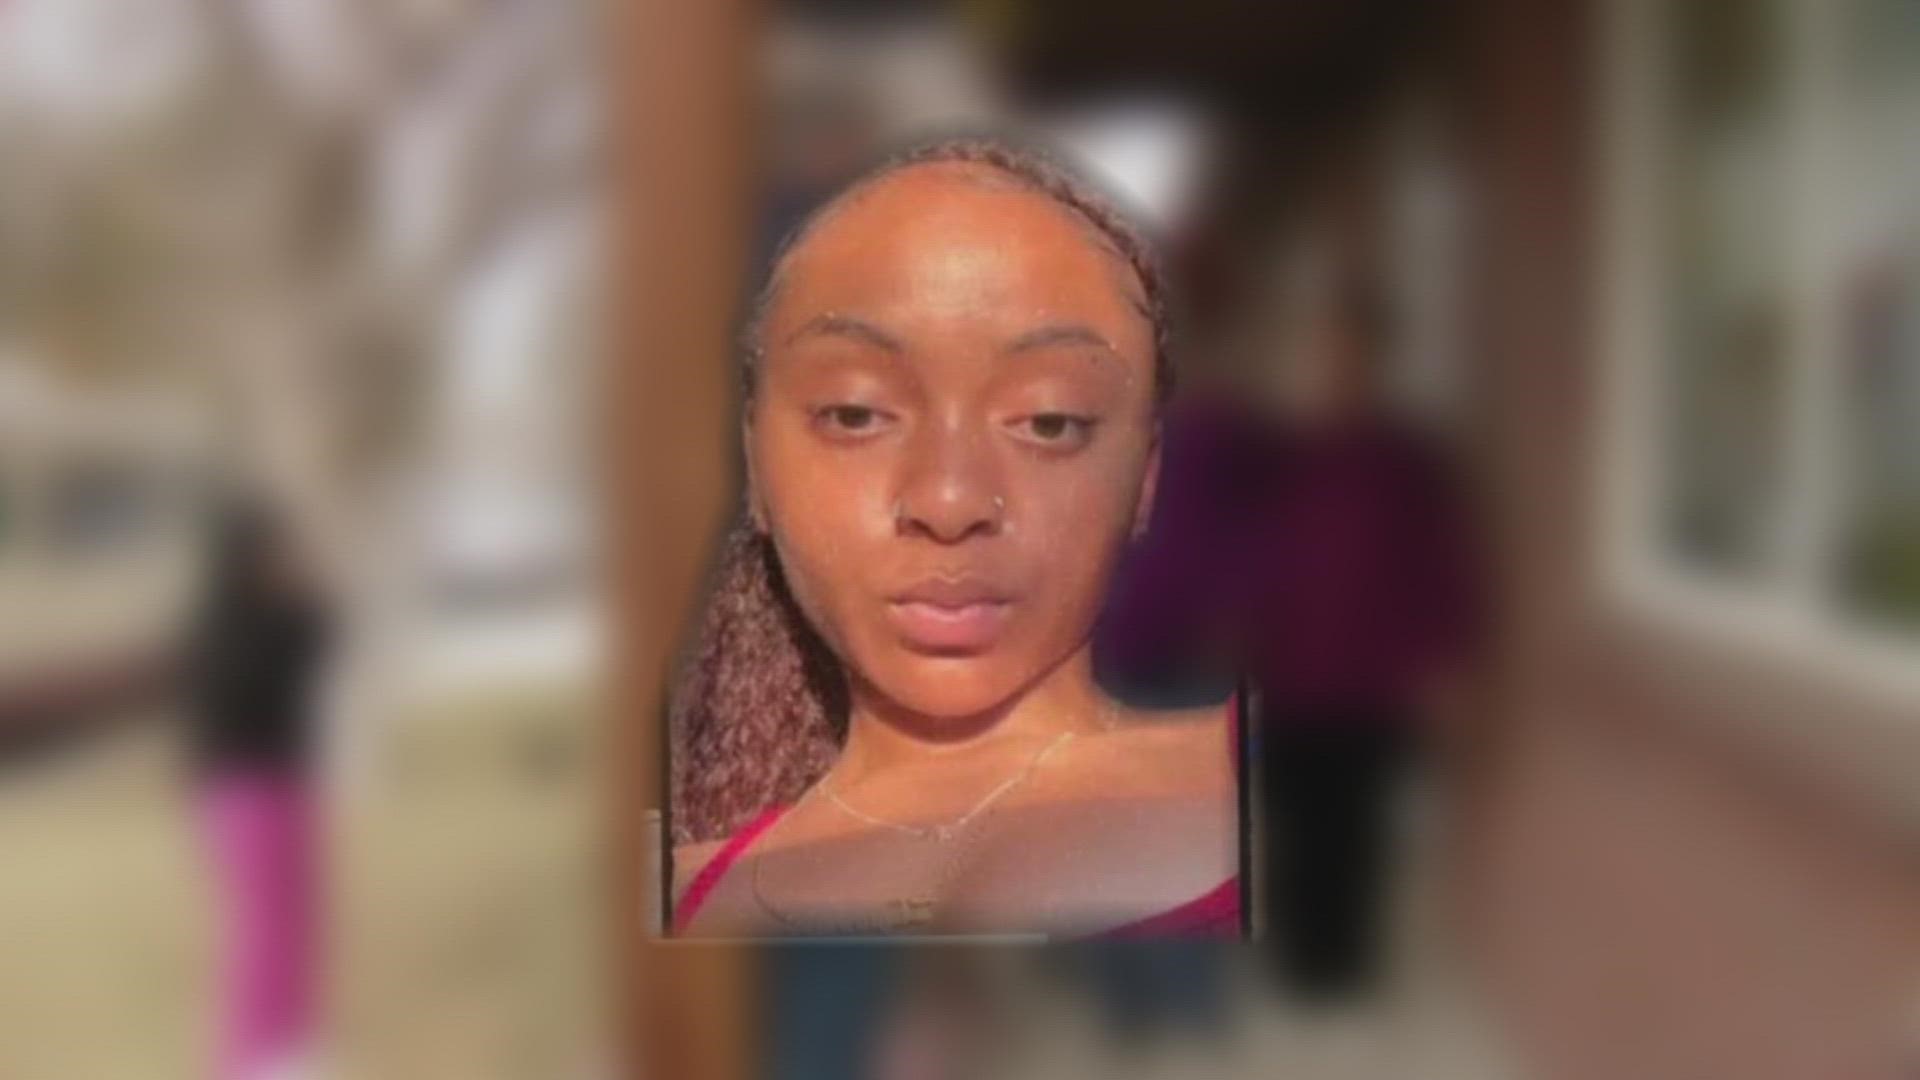 Tayanna Manuel's body was discovered Monday morning outside an apartment complex. Her mother tells 9NEWS that she believed she was killed in a shooting.